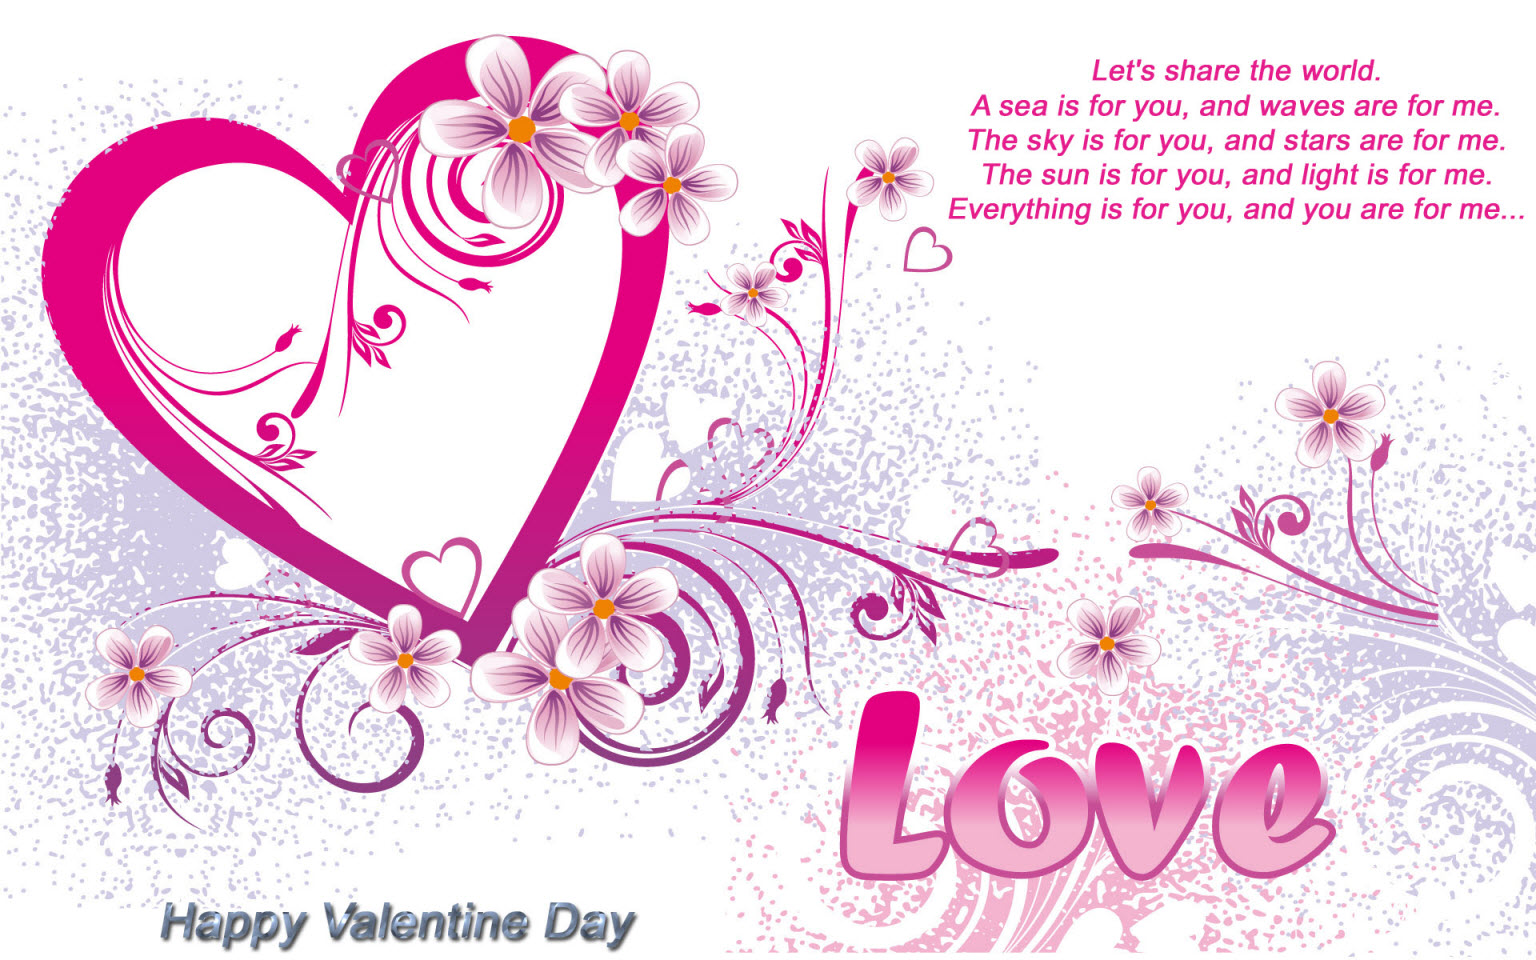 Valentines day greeting cards for Her/Girl Friend Pictures 